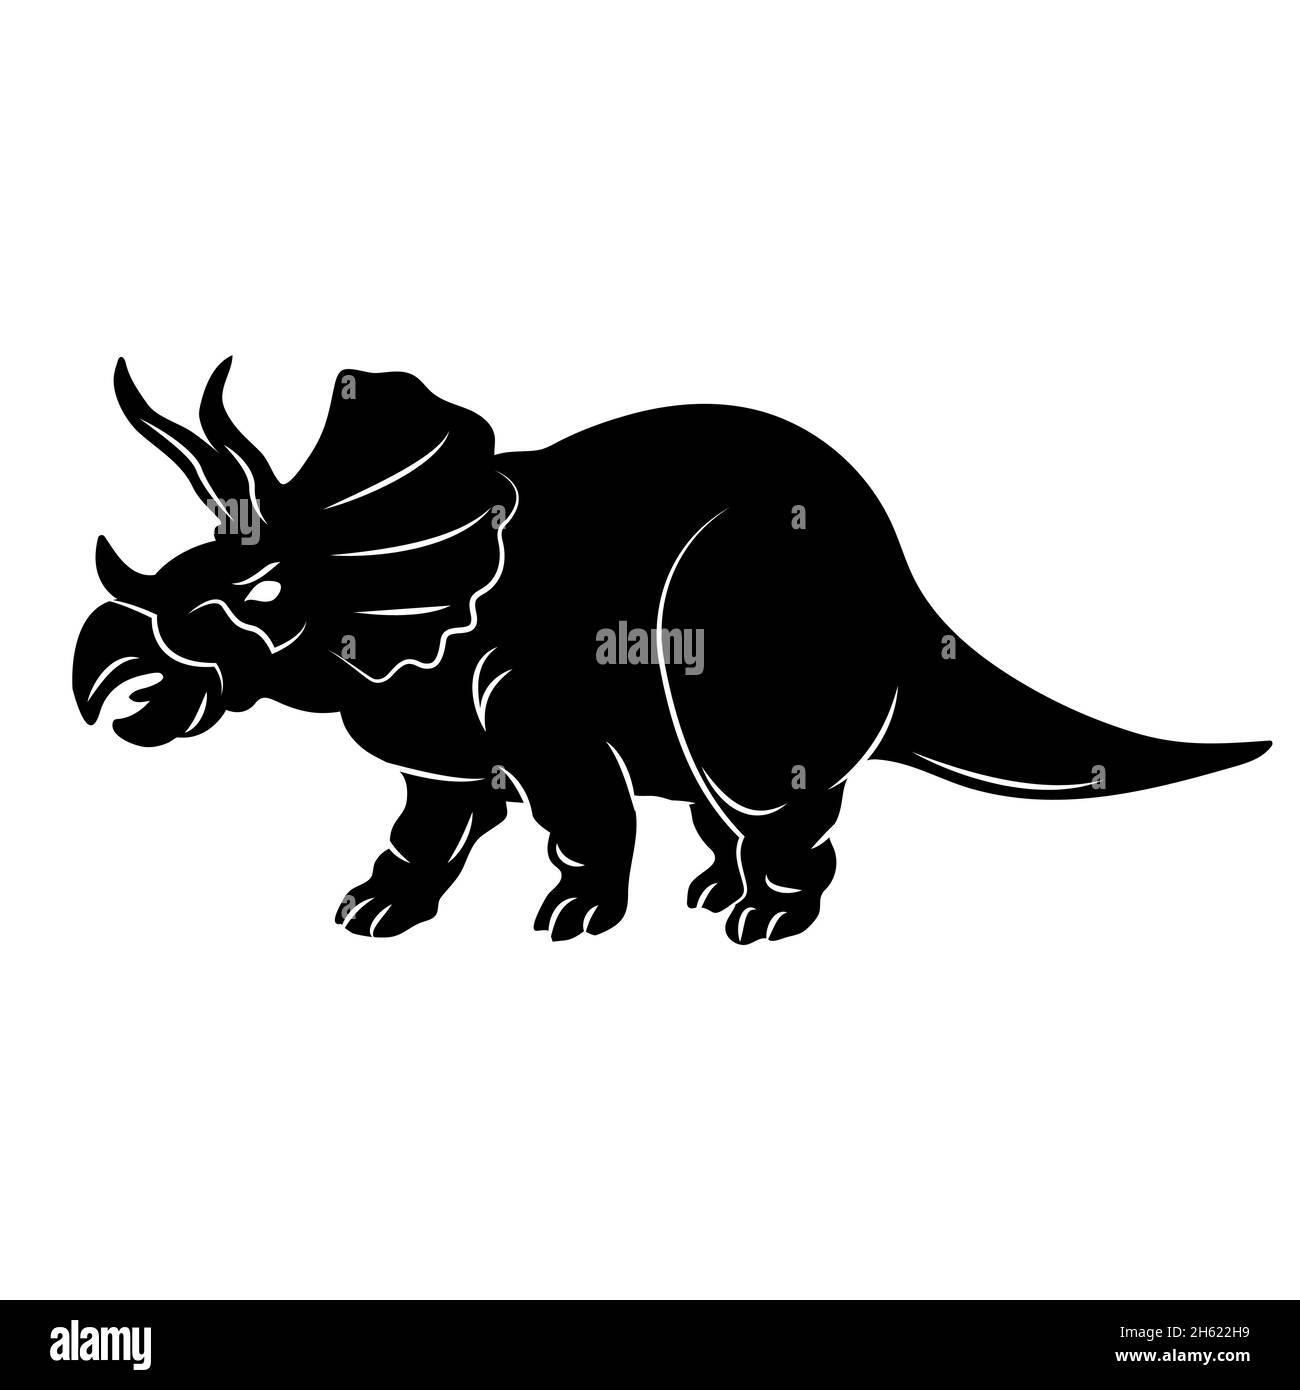 Triceratops. Triceratops dinosaur silhouette isolated on white background. Vector image. Stock Vector